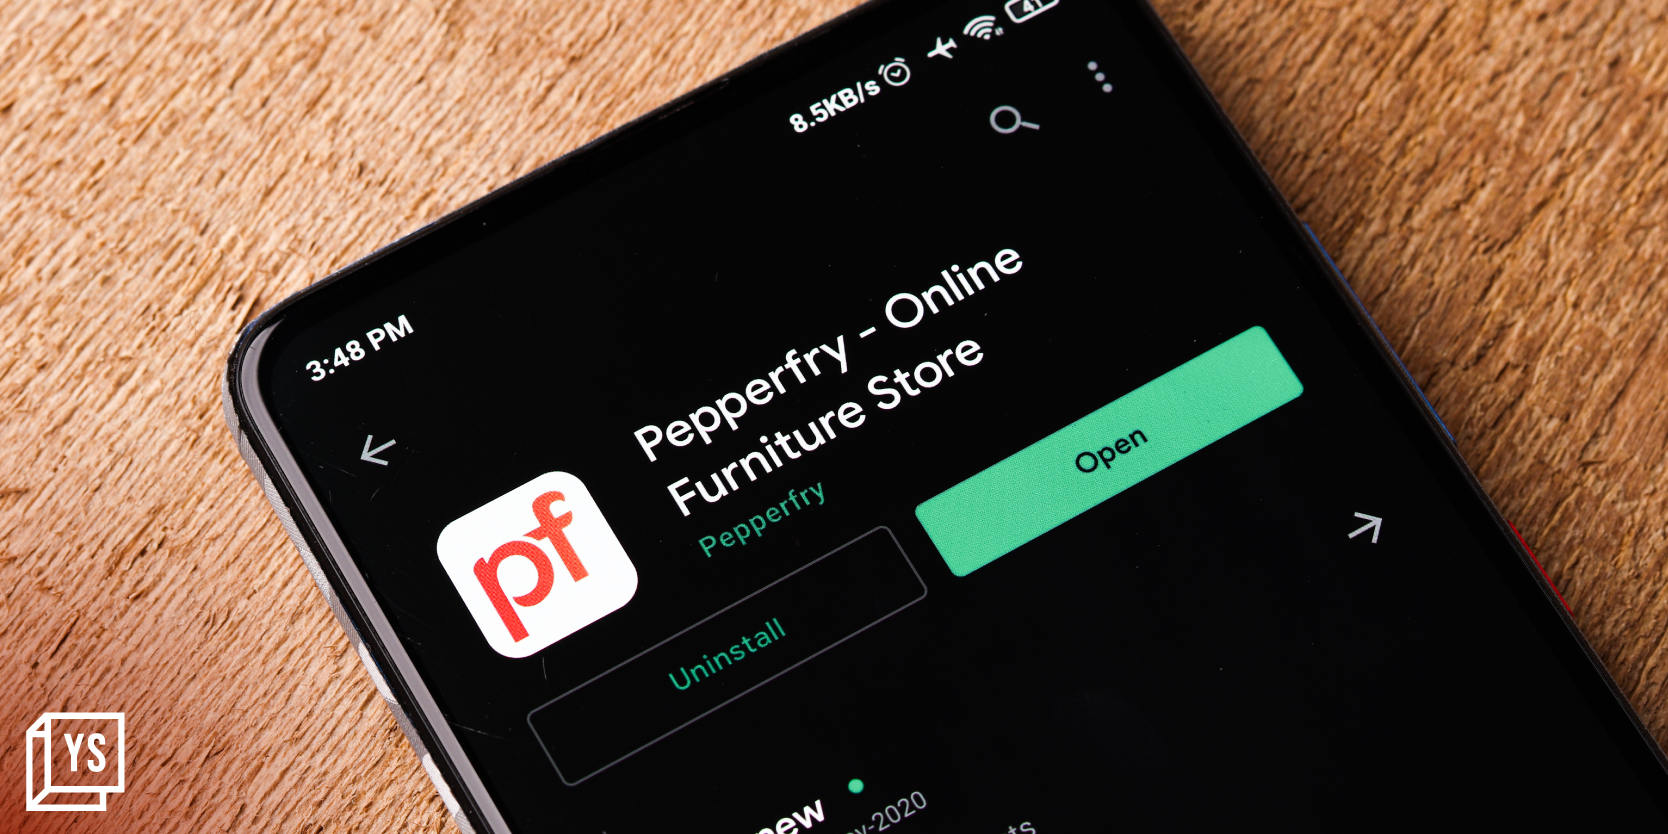 Pepperfry raises $23M from existing investors; elevates Ashish Shah as CEO